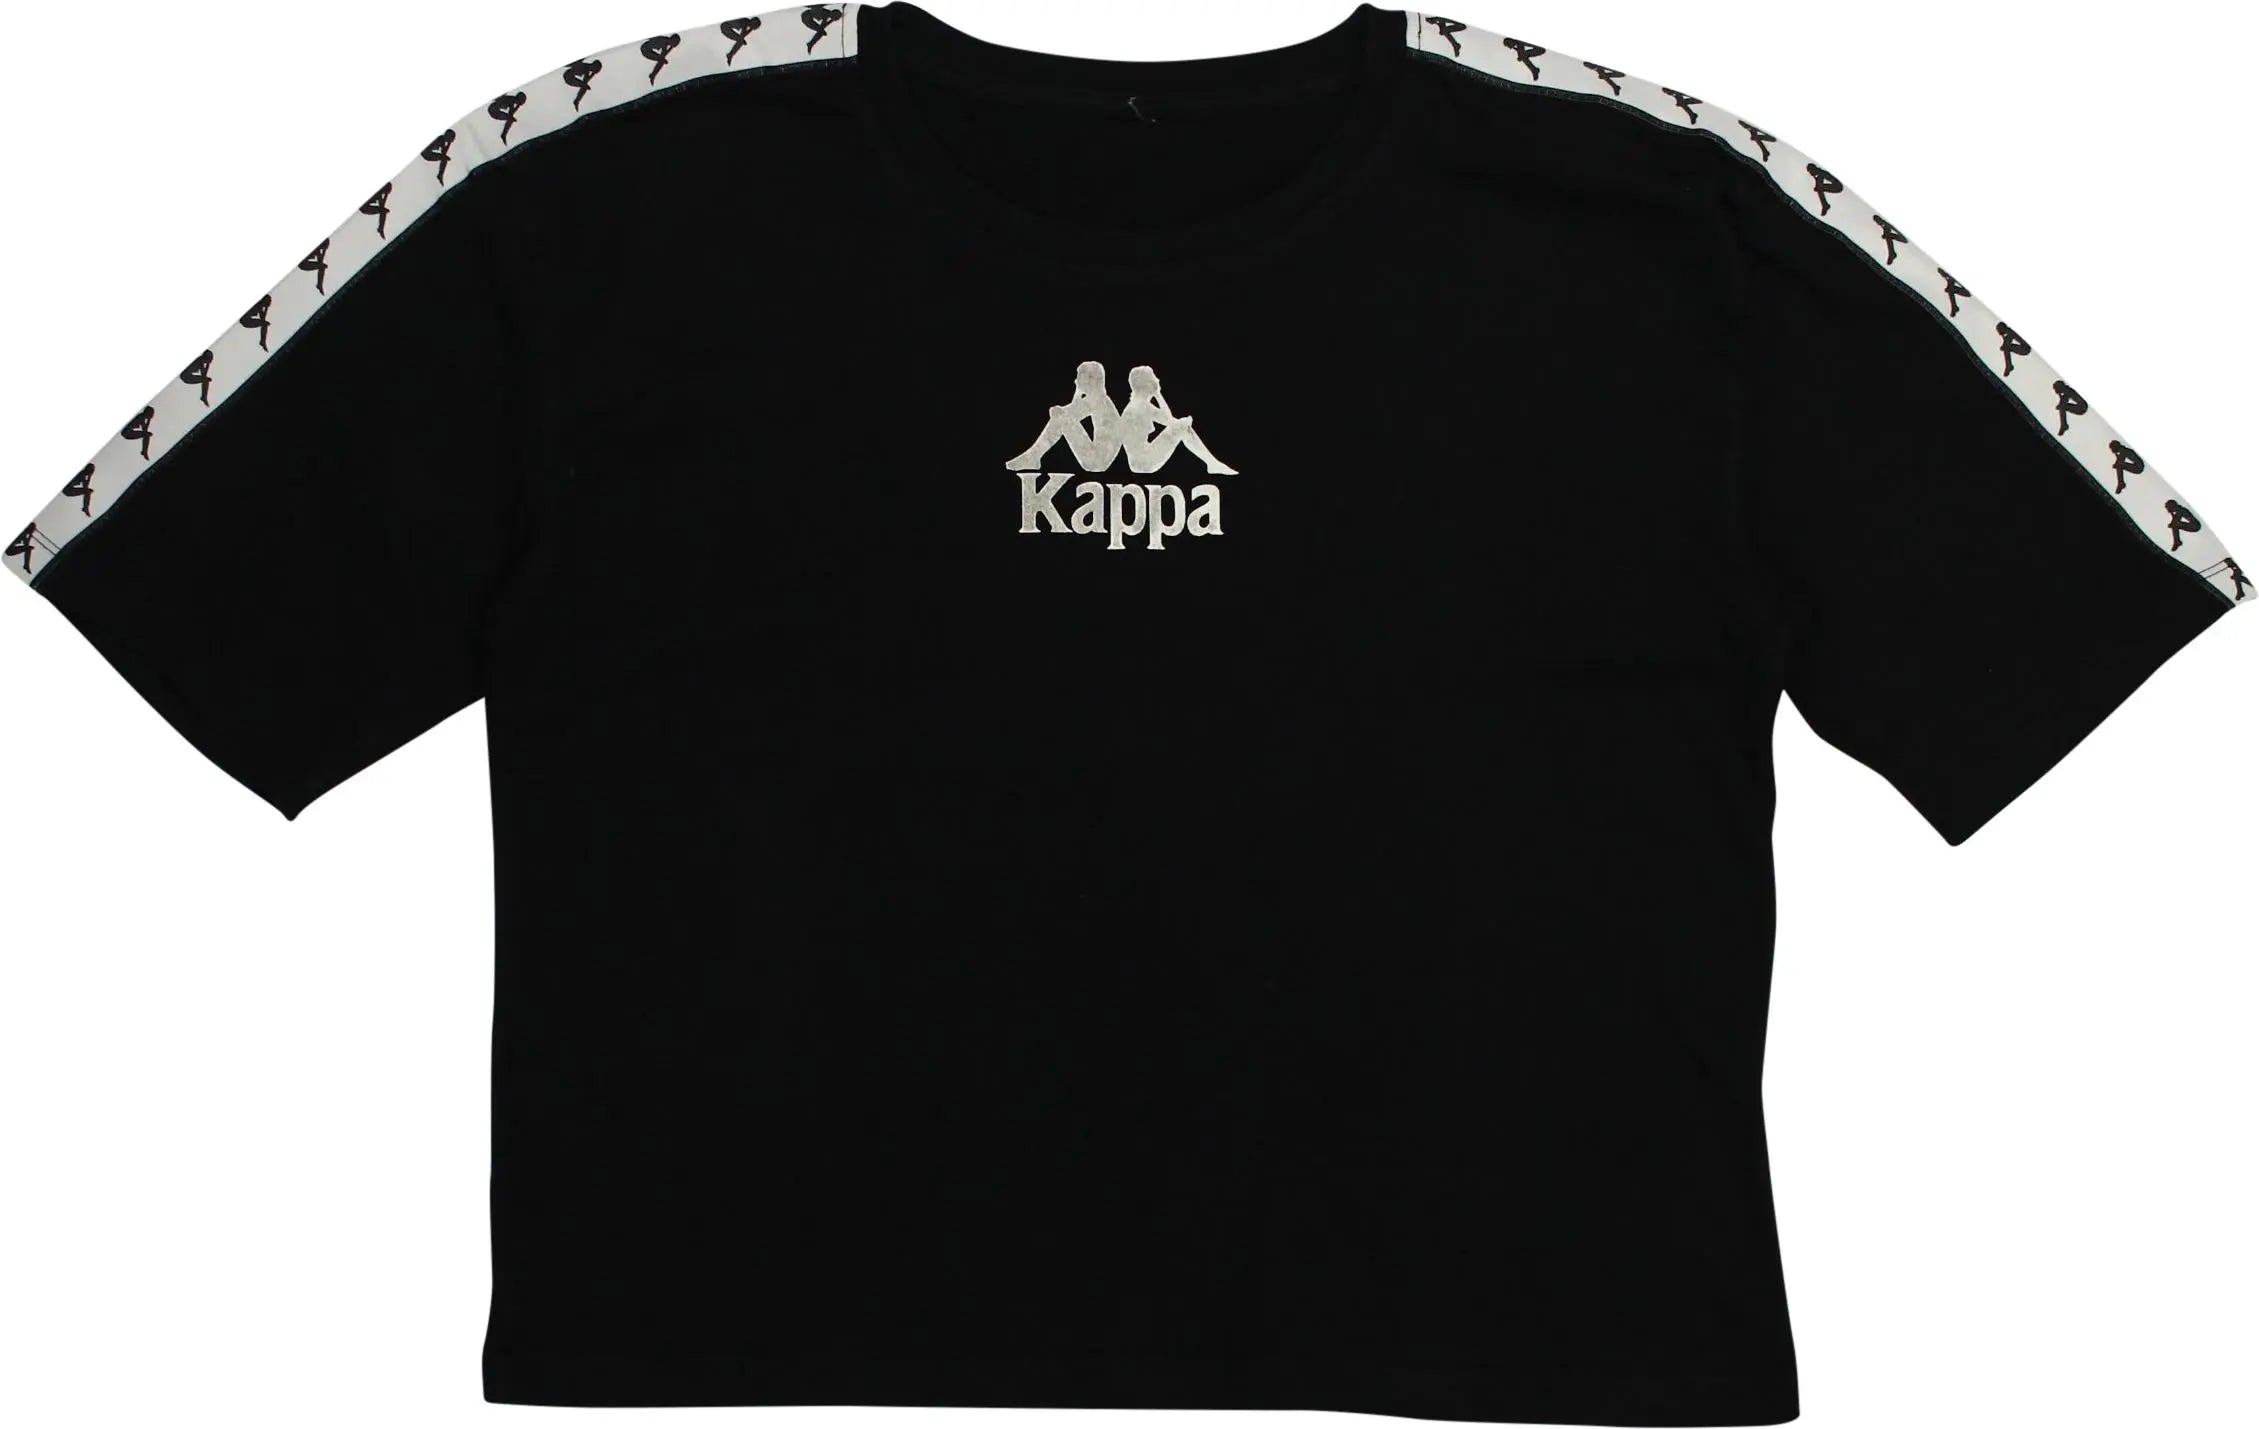 Kappa - Black T-shirt by Kappa- ThriftTale.com - Vintage and second handclothing